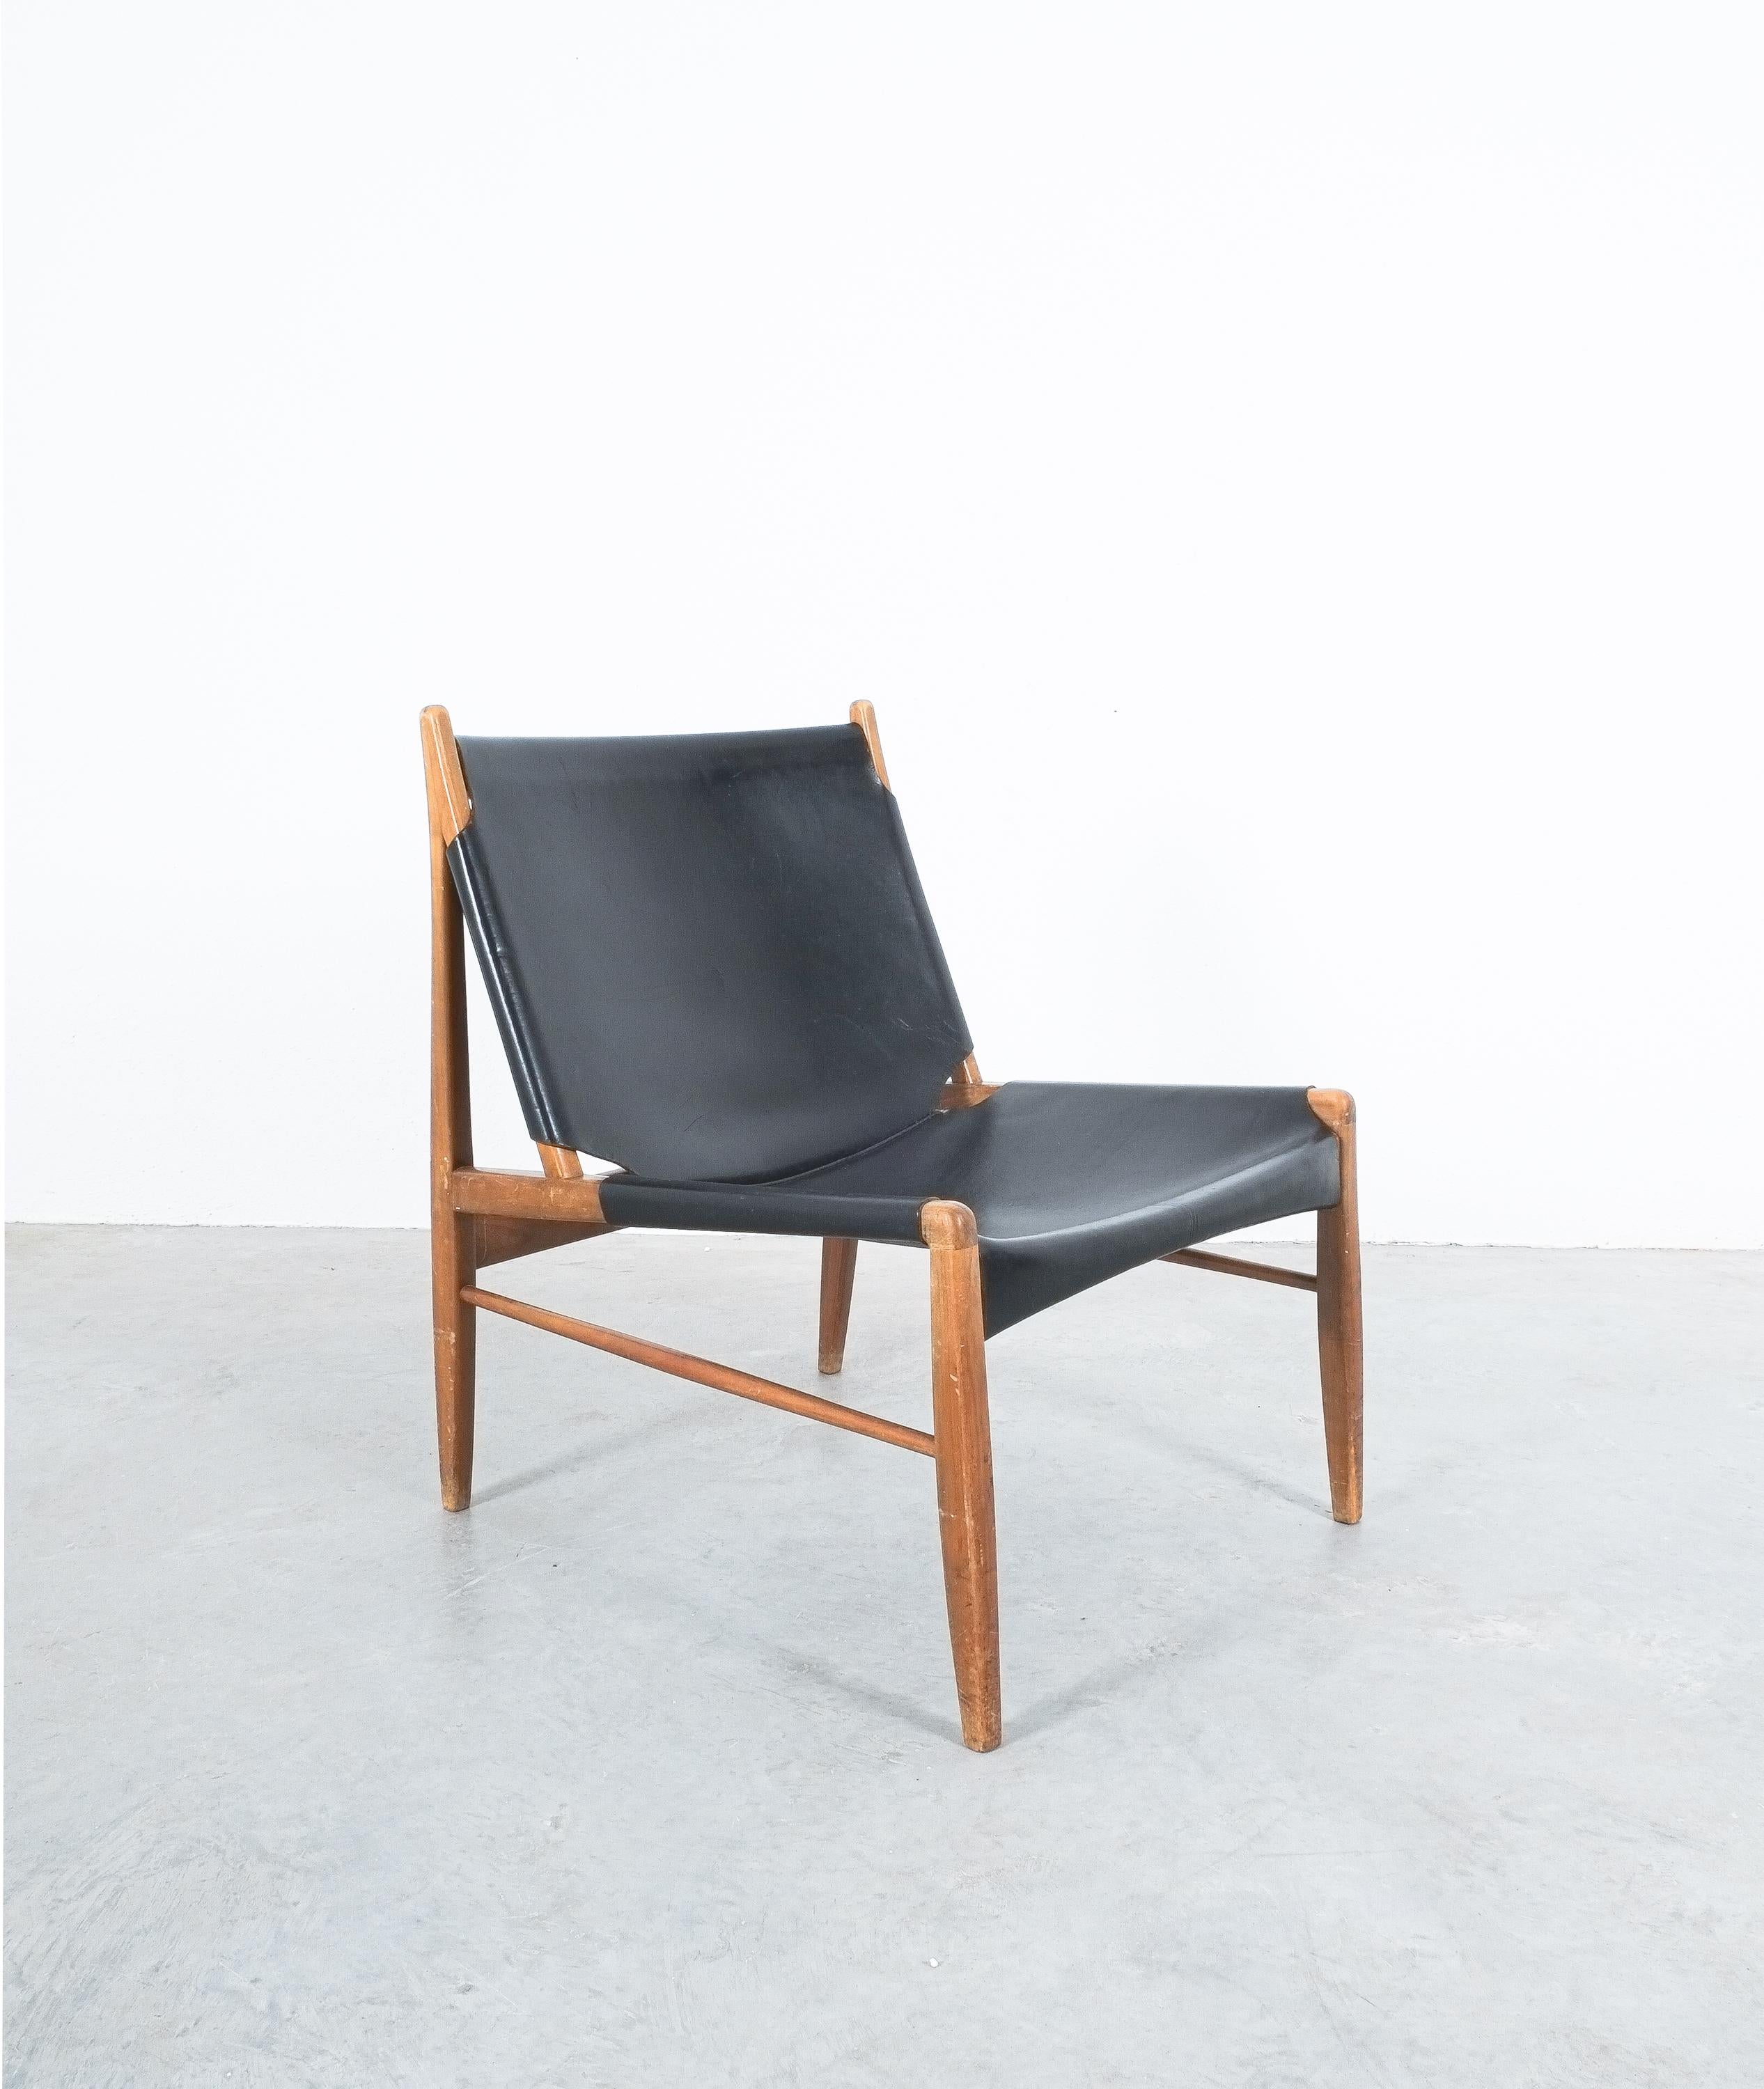 Franz Xaver Lutz hunting chair, Munchner Werkstätten, 1958

Early hunting chair by Franz Xaver Lutz featuring a solid oak frame with the original sturdy black leather seat and backrest in very good original condition.
Very lightweight and